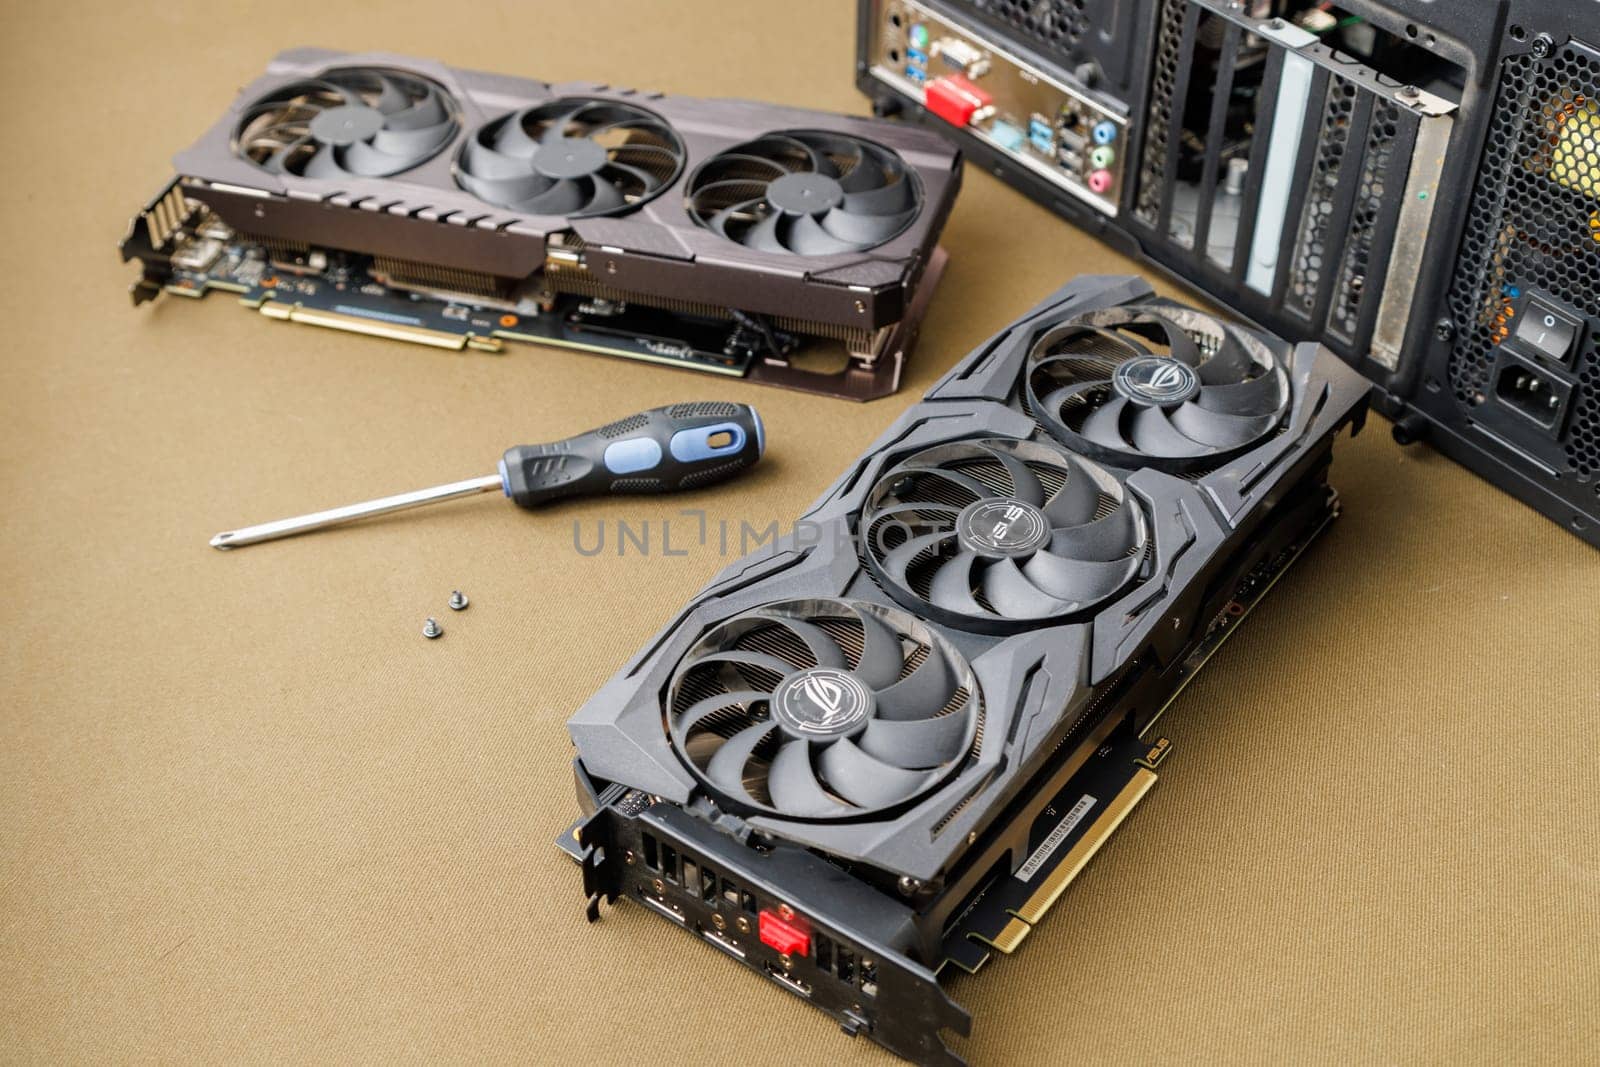 graphics card upgrading concept, two gaming graphics cards near desktop miditower ATX pc case on tan fabric background in Tula, Russia - July 27, 2022